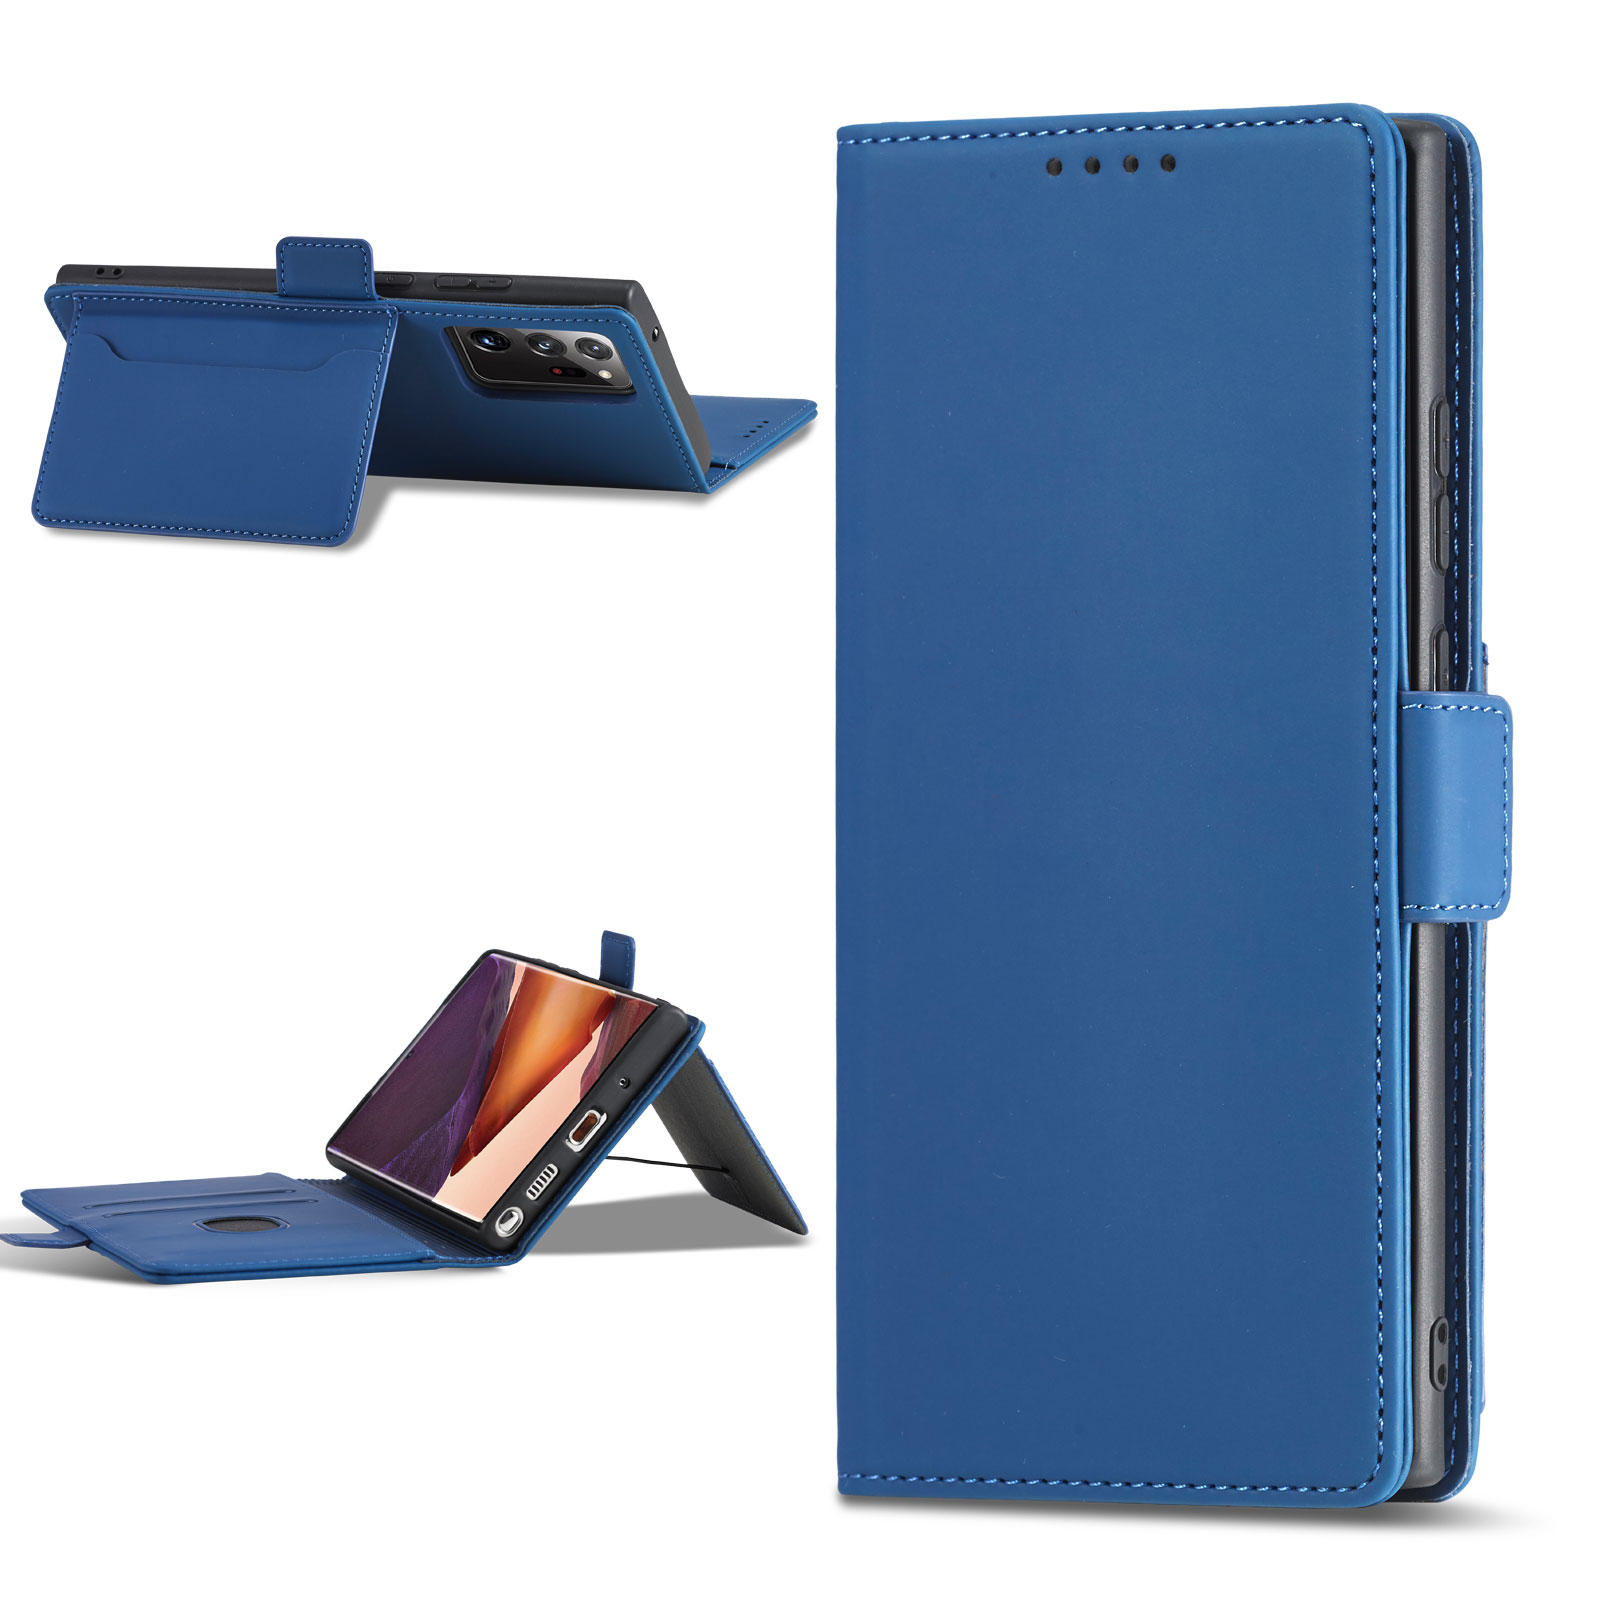 Bakeey-for-Samsung-Galaxy-Note-20-Case-Business-Flip-Magnetic-with-Multi-Card-Slots-Wallet-Shockproo-1763271-20